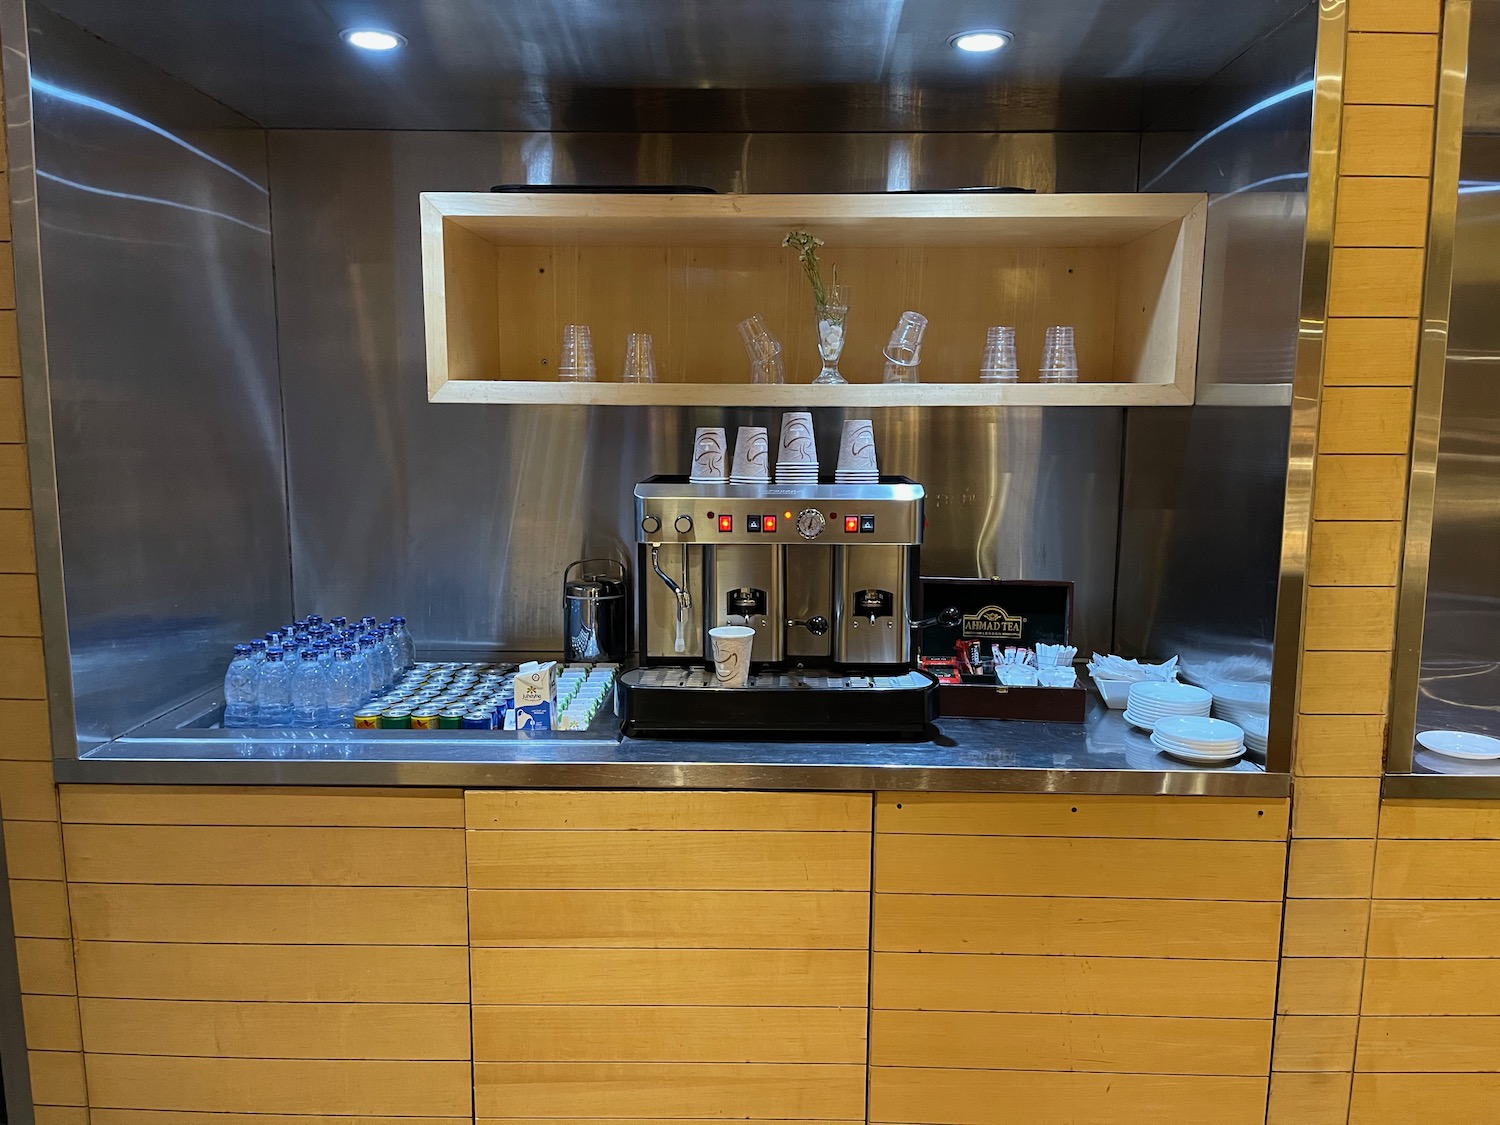 a coffee machine and bottles on a counter